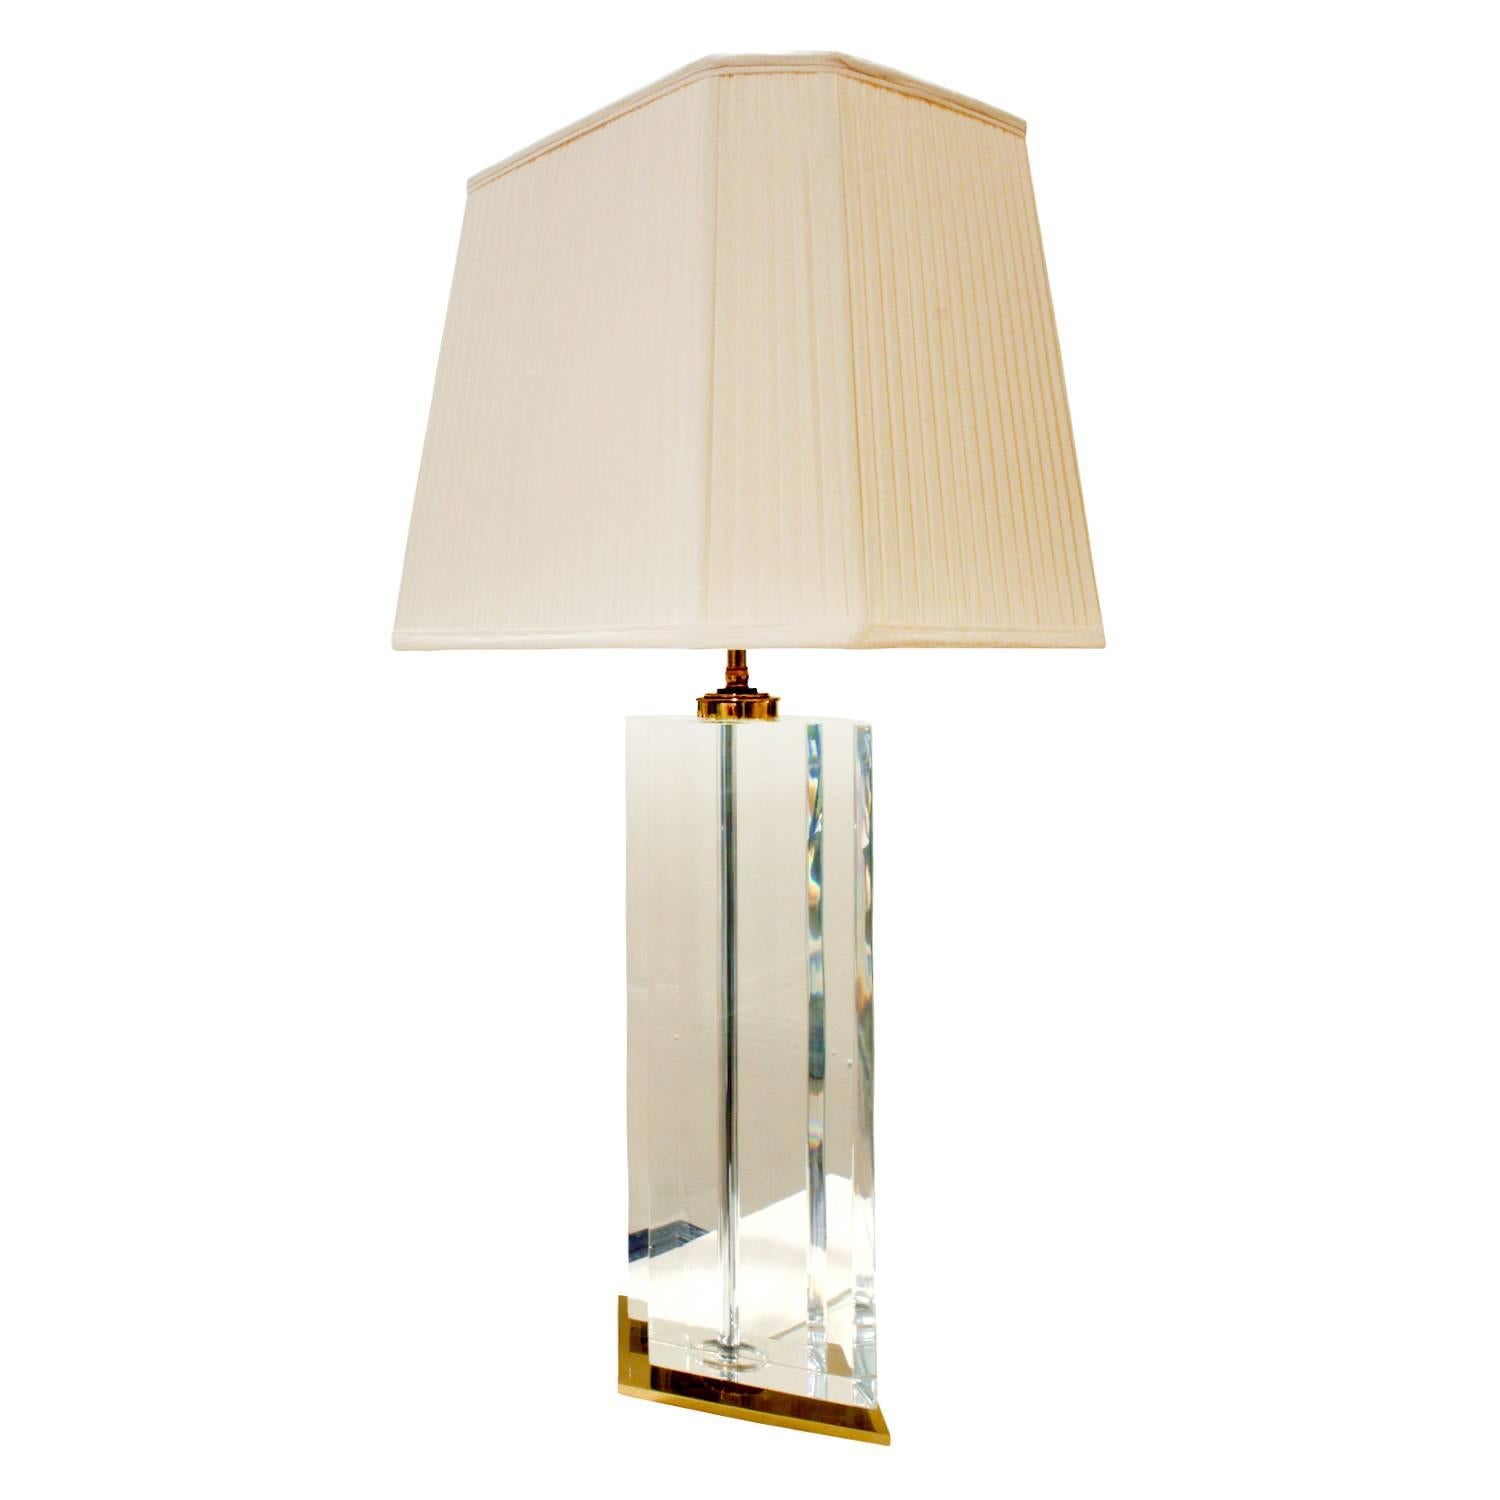 Exceptional table lamp in thick faceted lucite with brass base and hardware, American 1970's.

(height adjustable up to 35 inches)
Lamp shade:  W: 16 inches D: 12 inches H: 12 inches